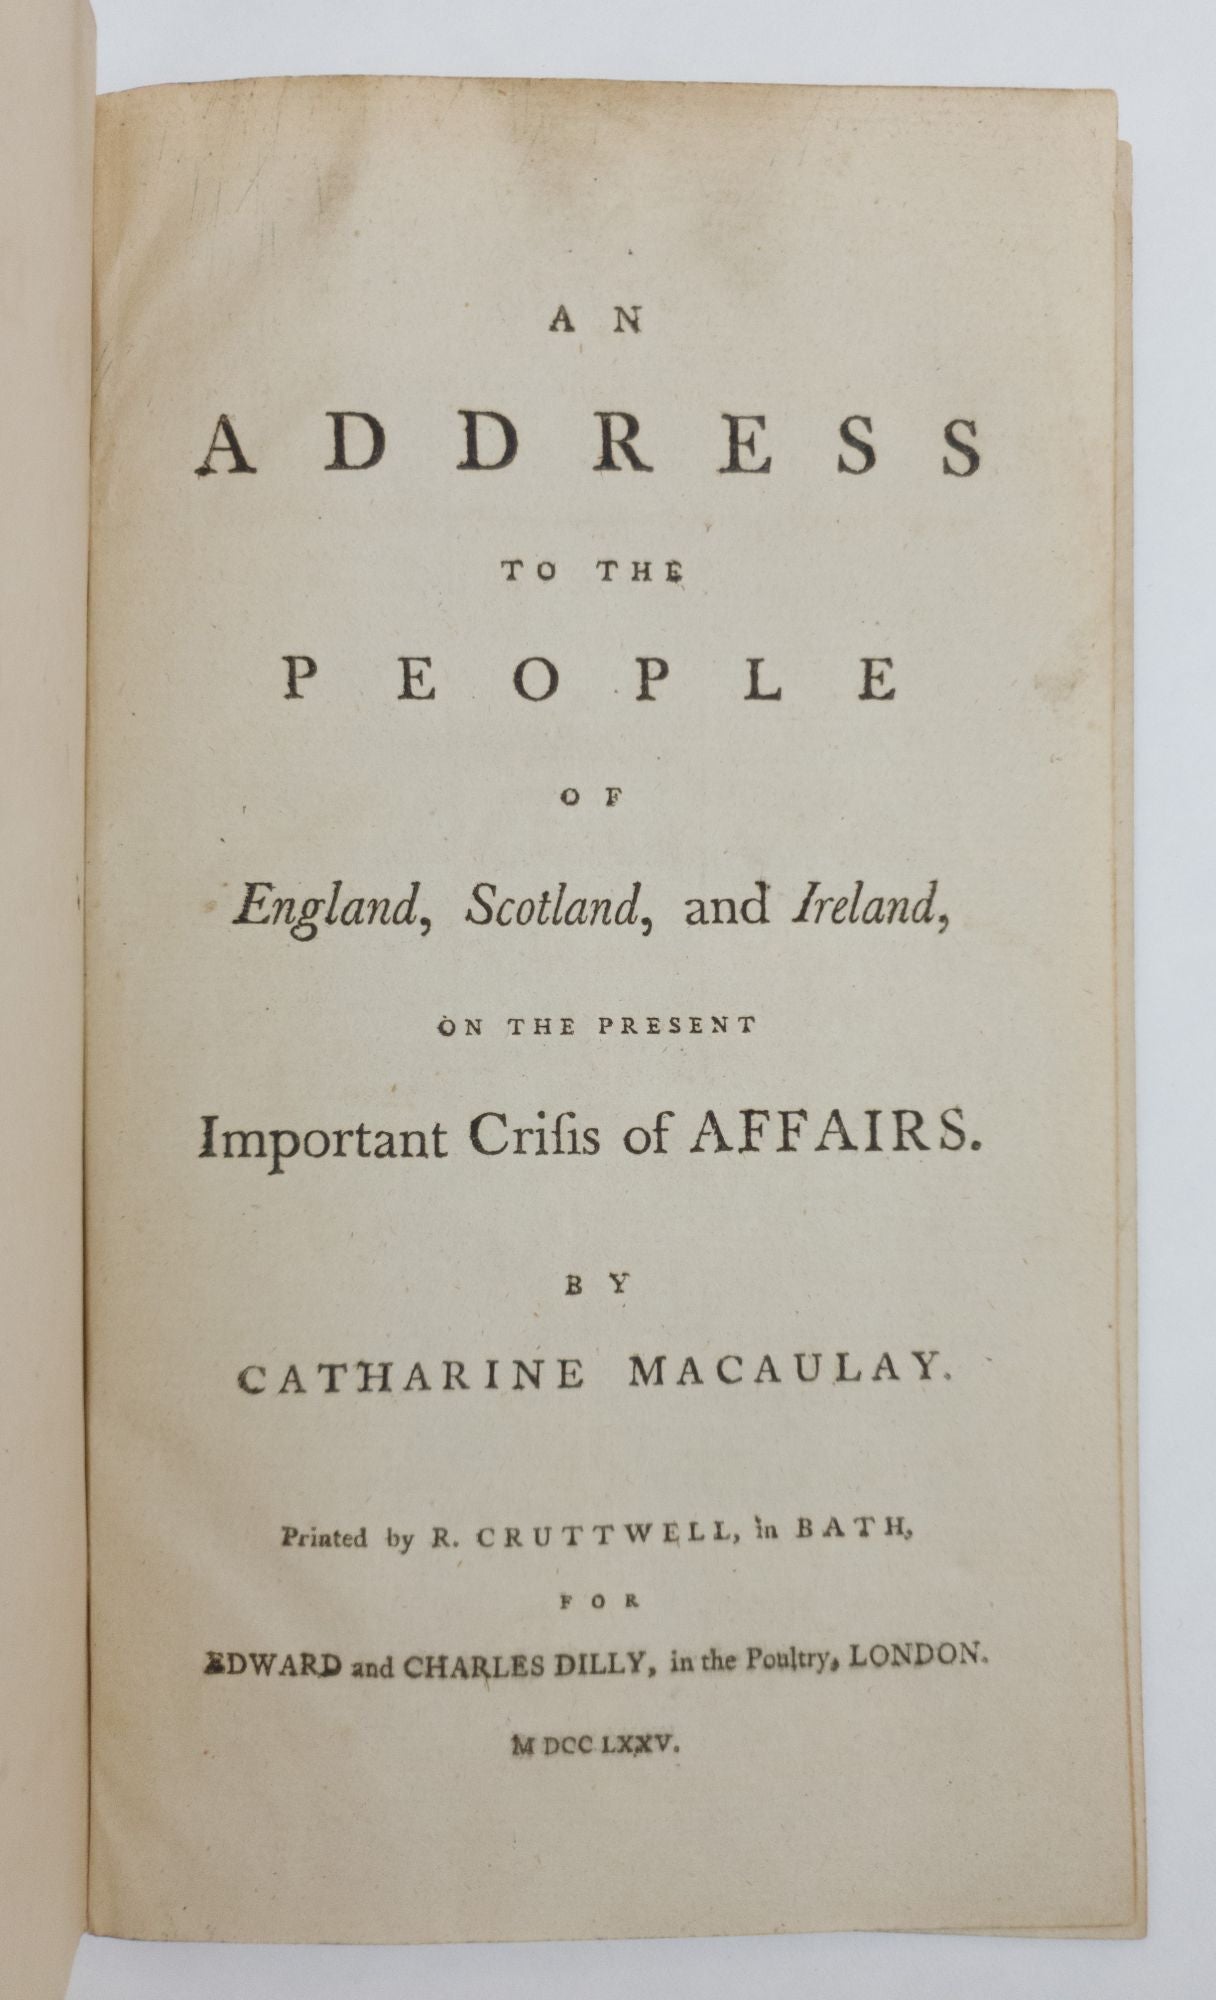 1353593 AN ADDRESS TO THE PEOPLE OF ENGLAND, SCOTLAND, AND IRELAND, ON THE PRESENT IMPORTANT CRISIS OF AFFAIRS. Catharine Macaulay.